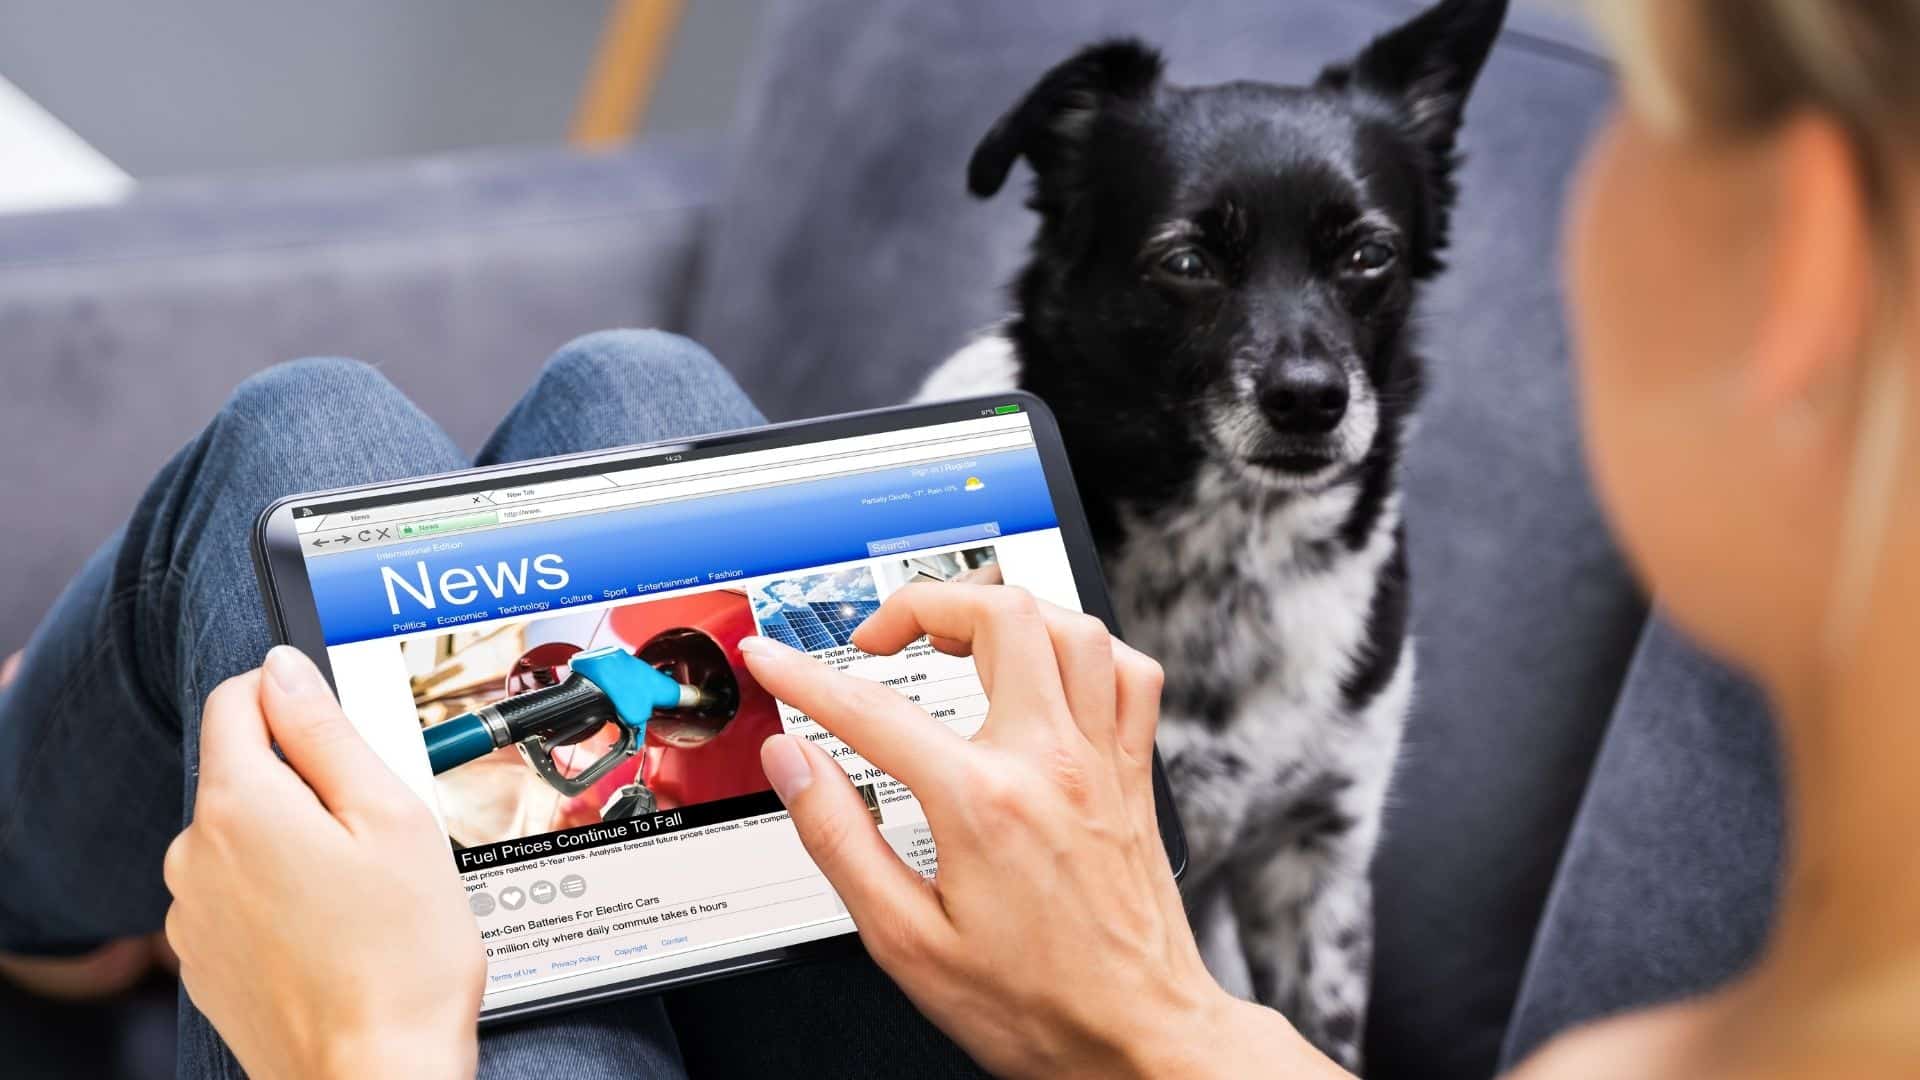 Increase media coverage for your pet business: An image of a person reading the news on their tablet device with a black and white dog sat by their side.